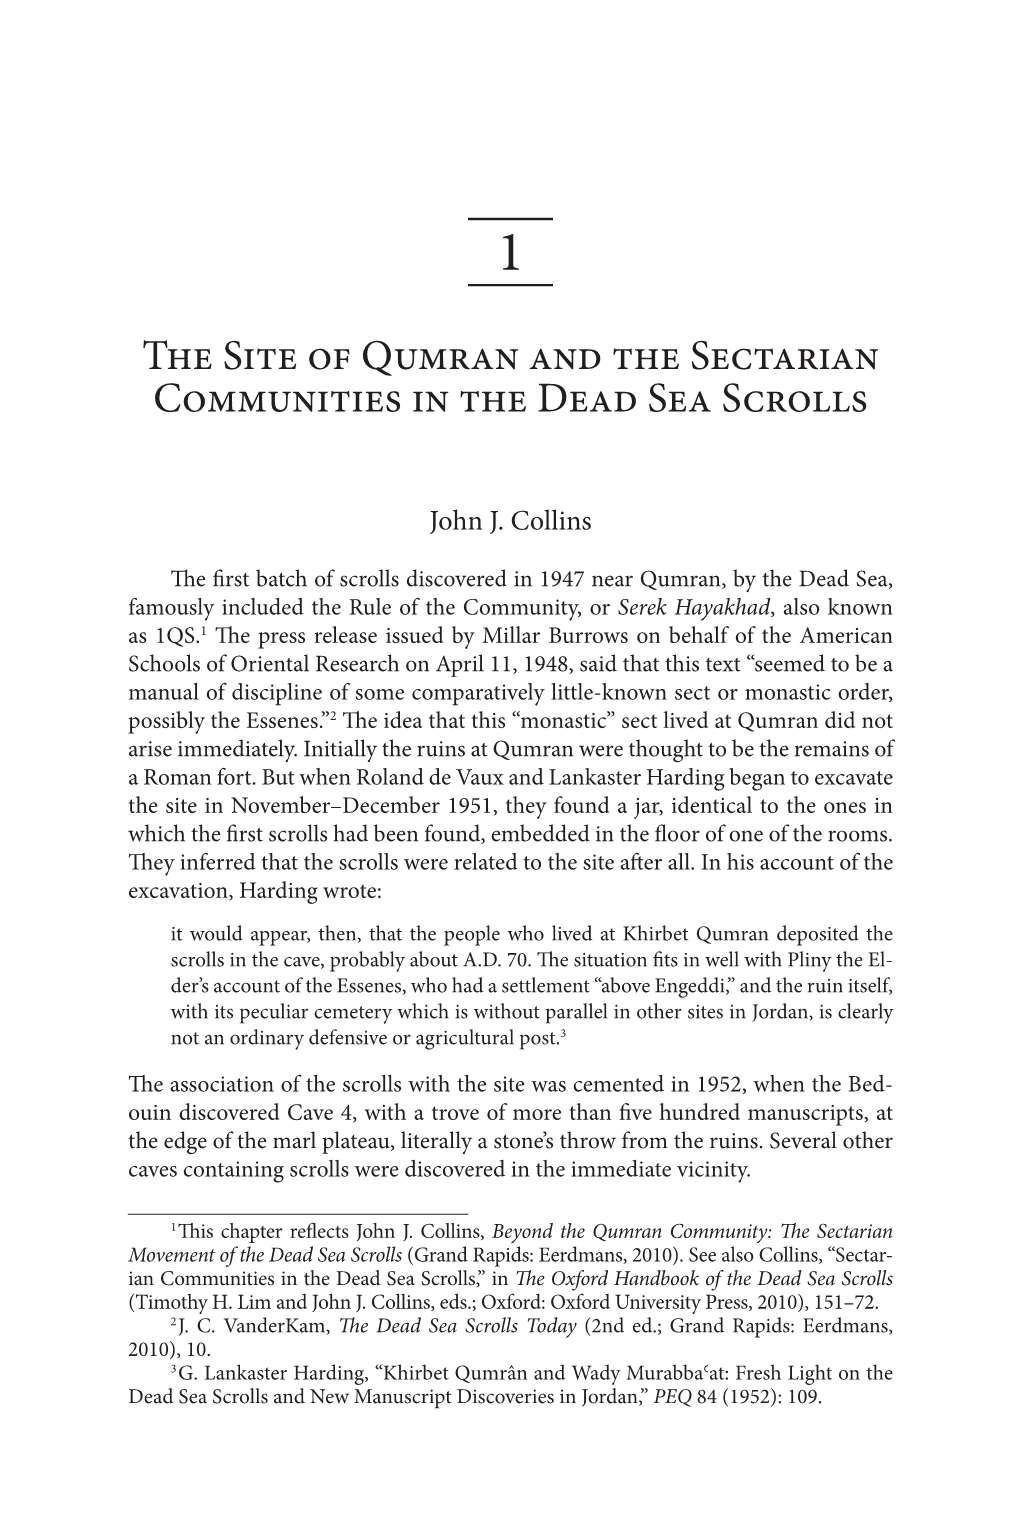 The Site of Qumran and the Sectarian Communities in the Dead Sea Scrolls